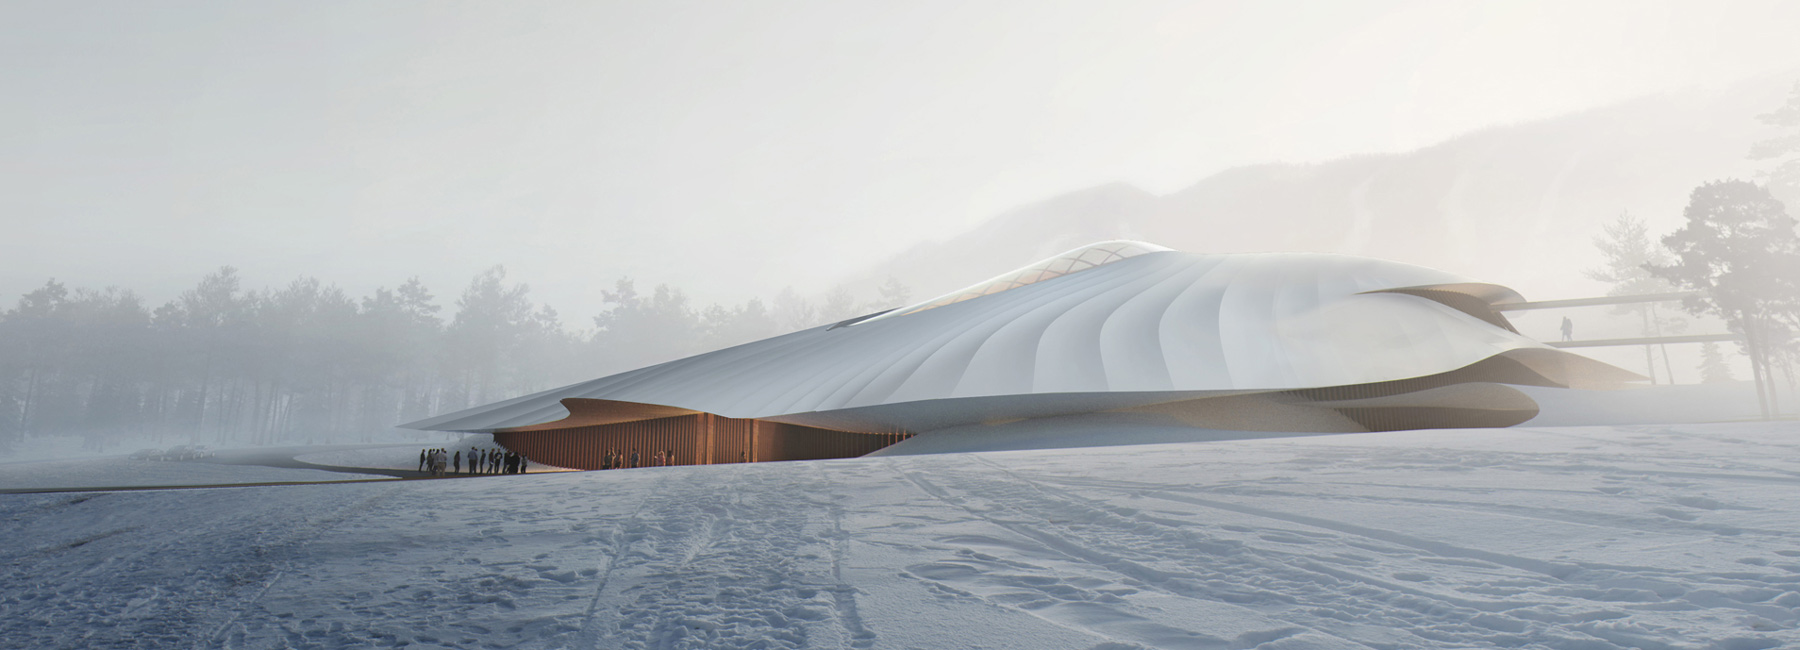 MAD's yabuli conference centre mimics the snow-capped mountains of northeastern china